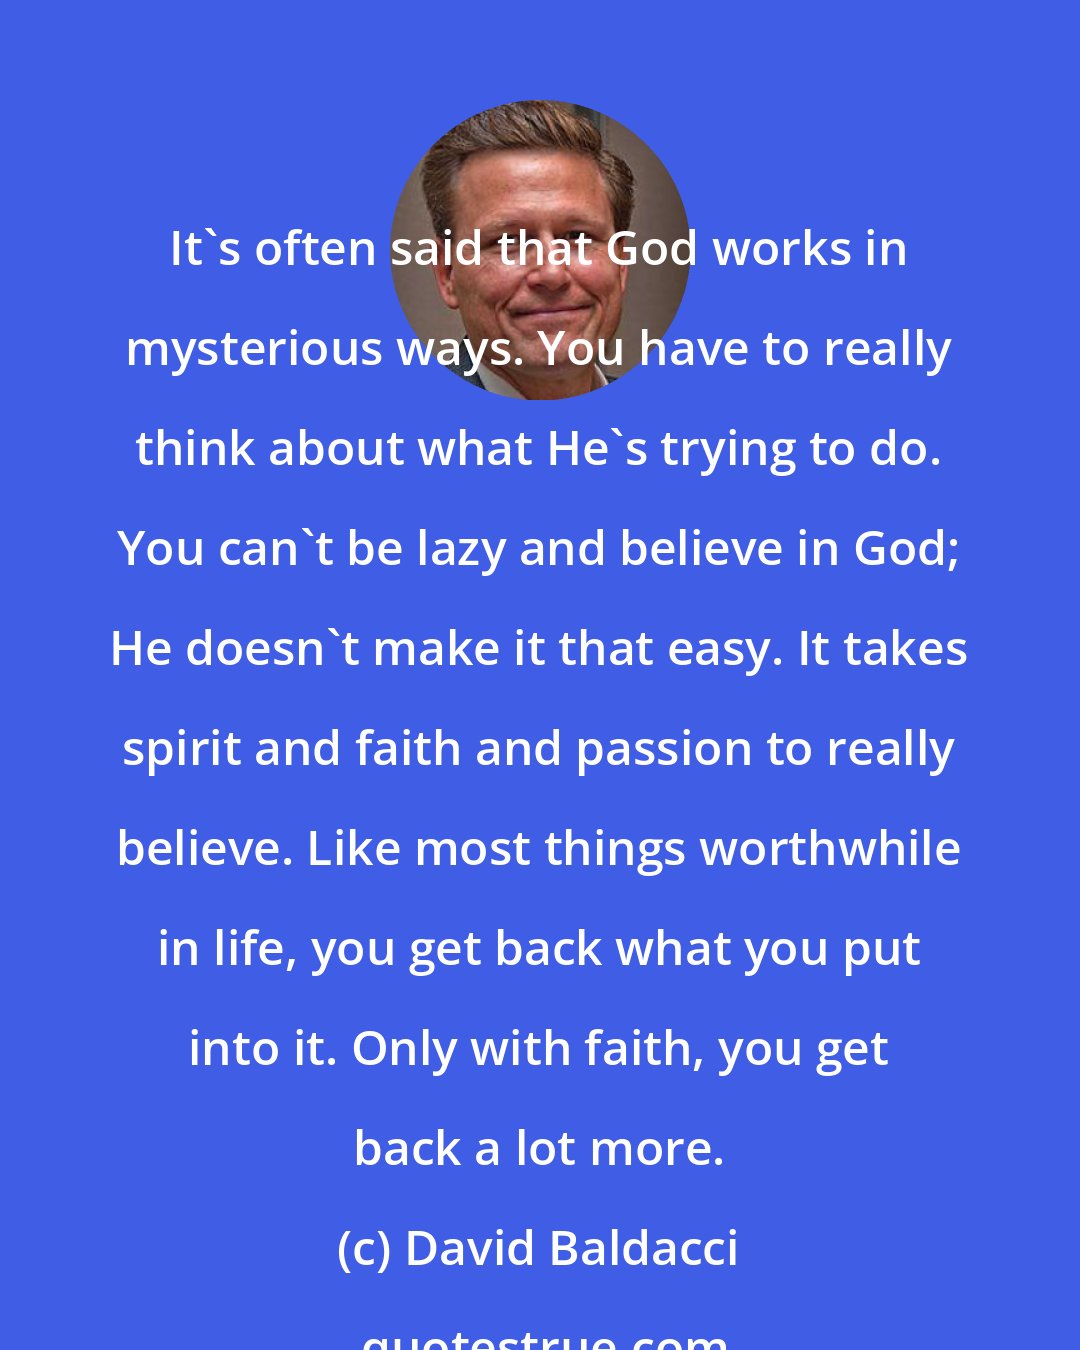 David Baldacci: It's often said that God works in mysterious ways. You have to really think about what He's trying to do. You can't be lazy and believe in God; He doesn't make it that easy. It takes spirit and faith and passion to really believe. Like most things worthwhile in life, you get back what you put into it. Only with faith, you get back a lot more.